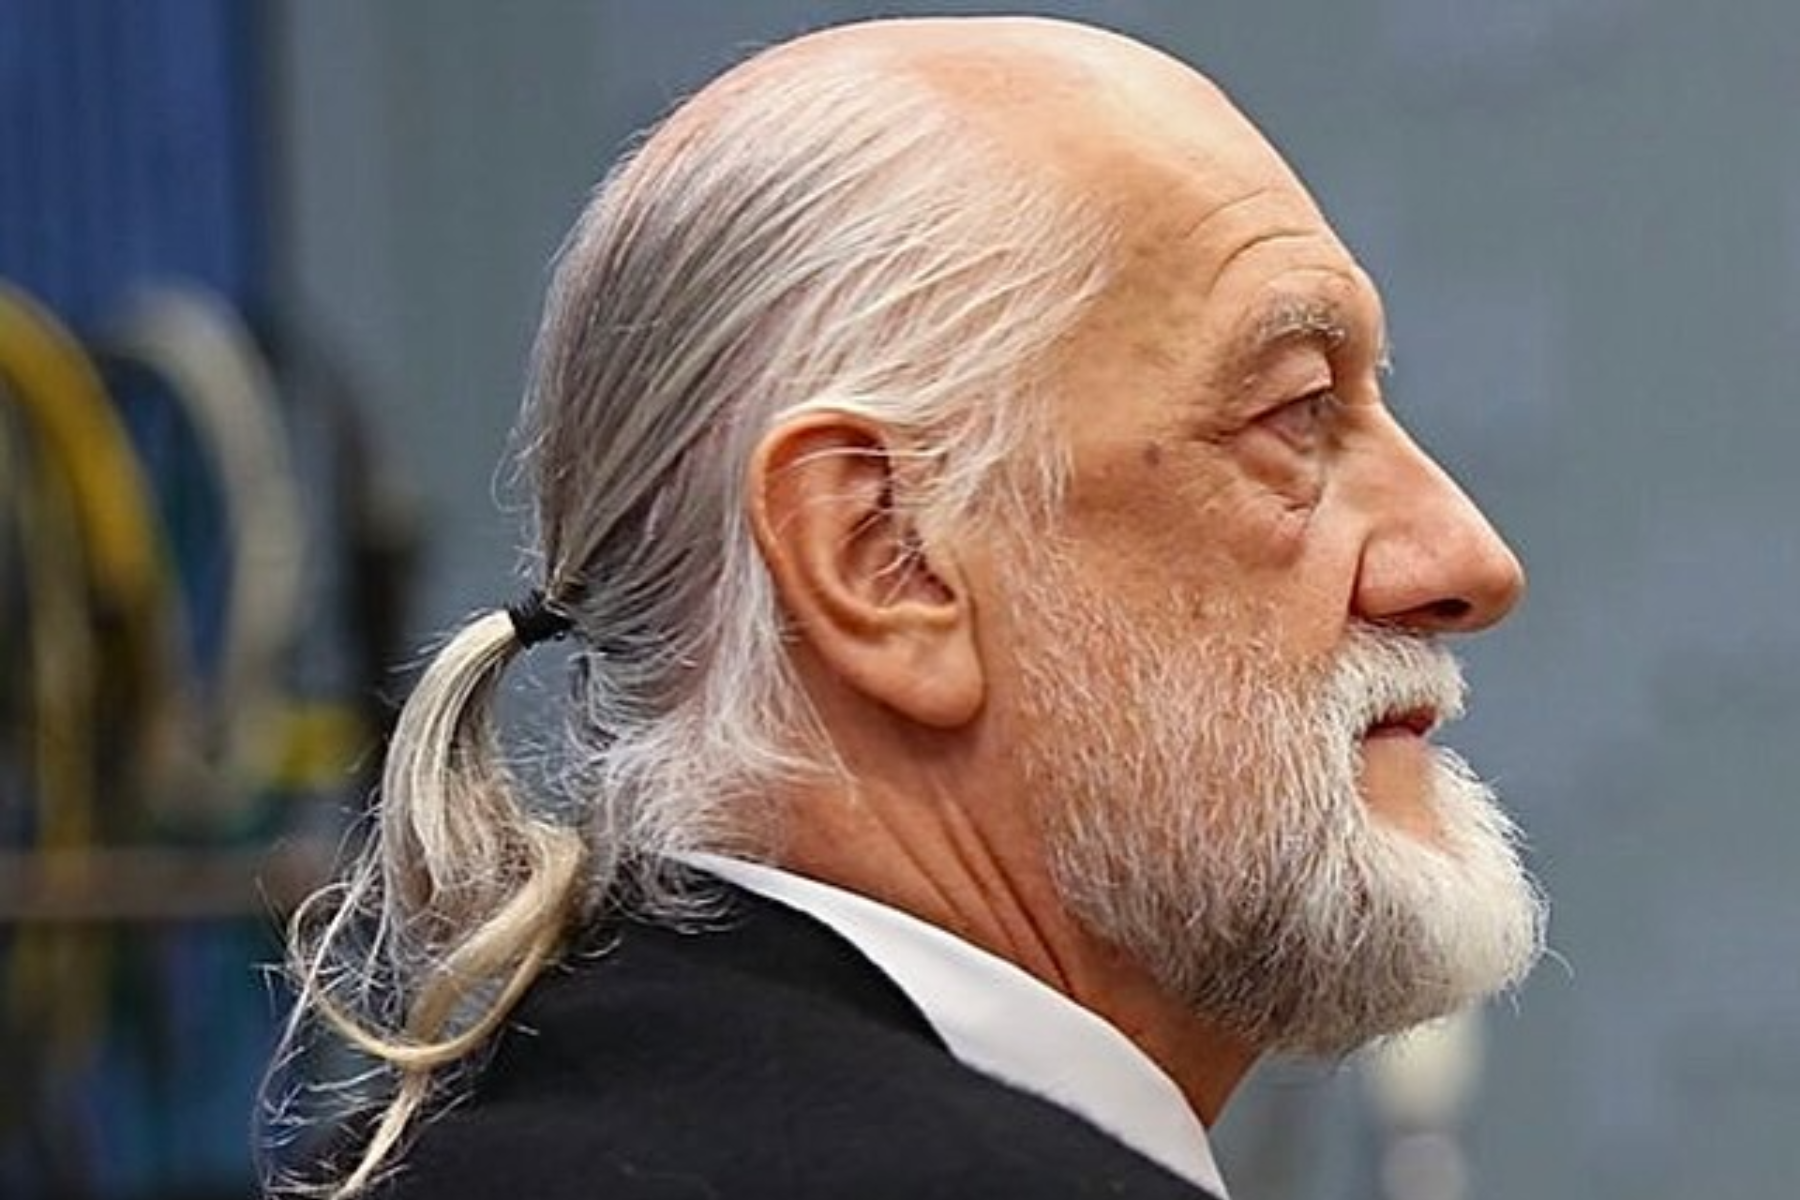 An aged man is rocking a low ponytail style